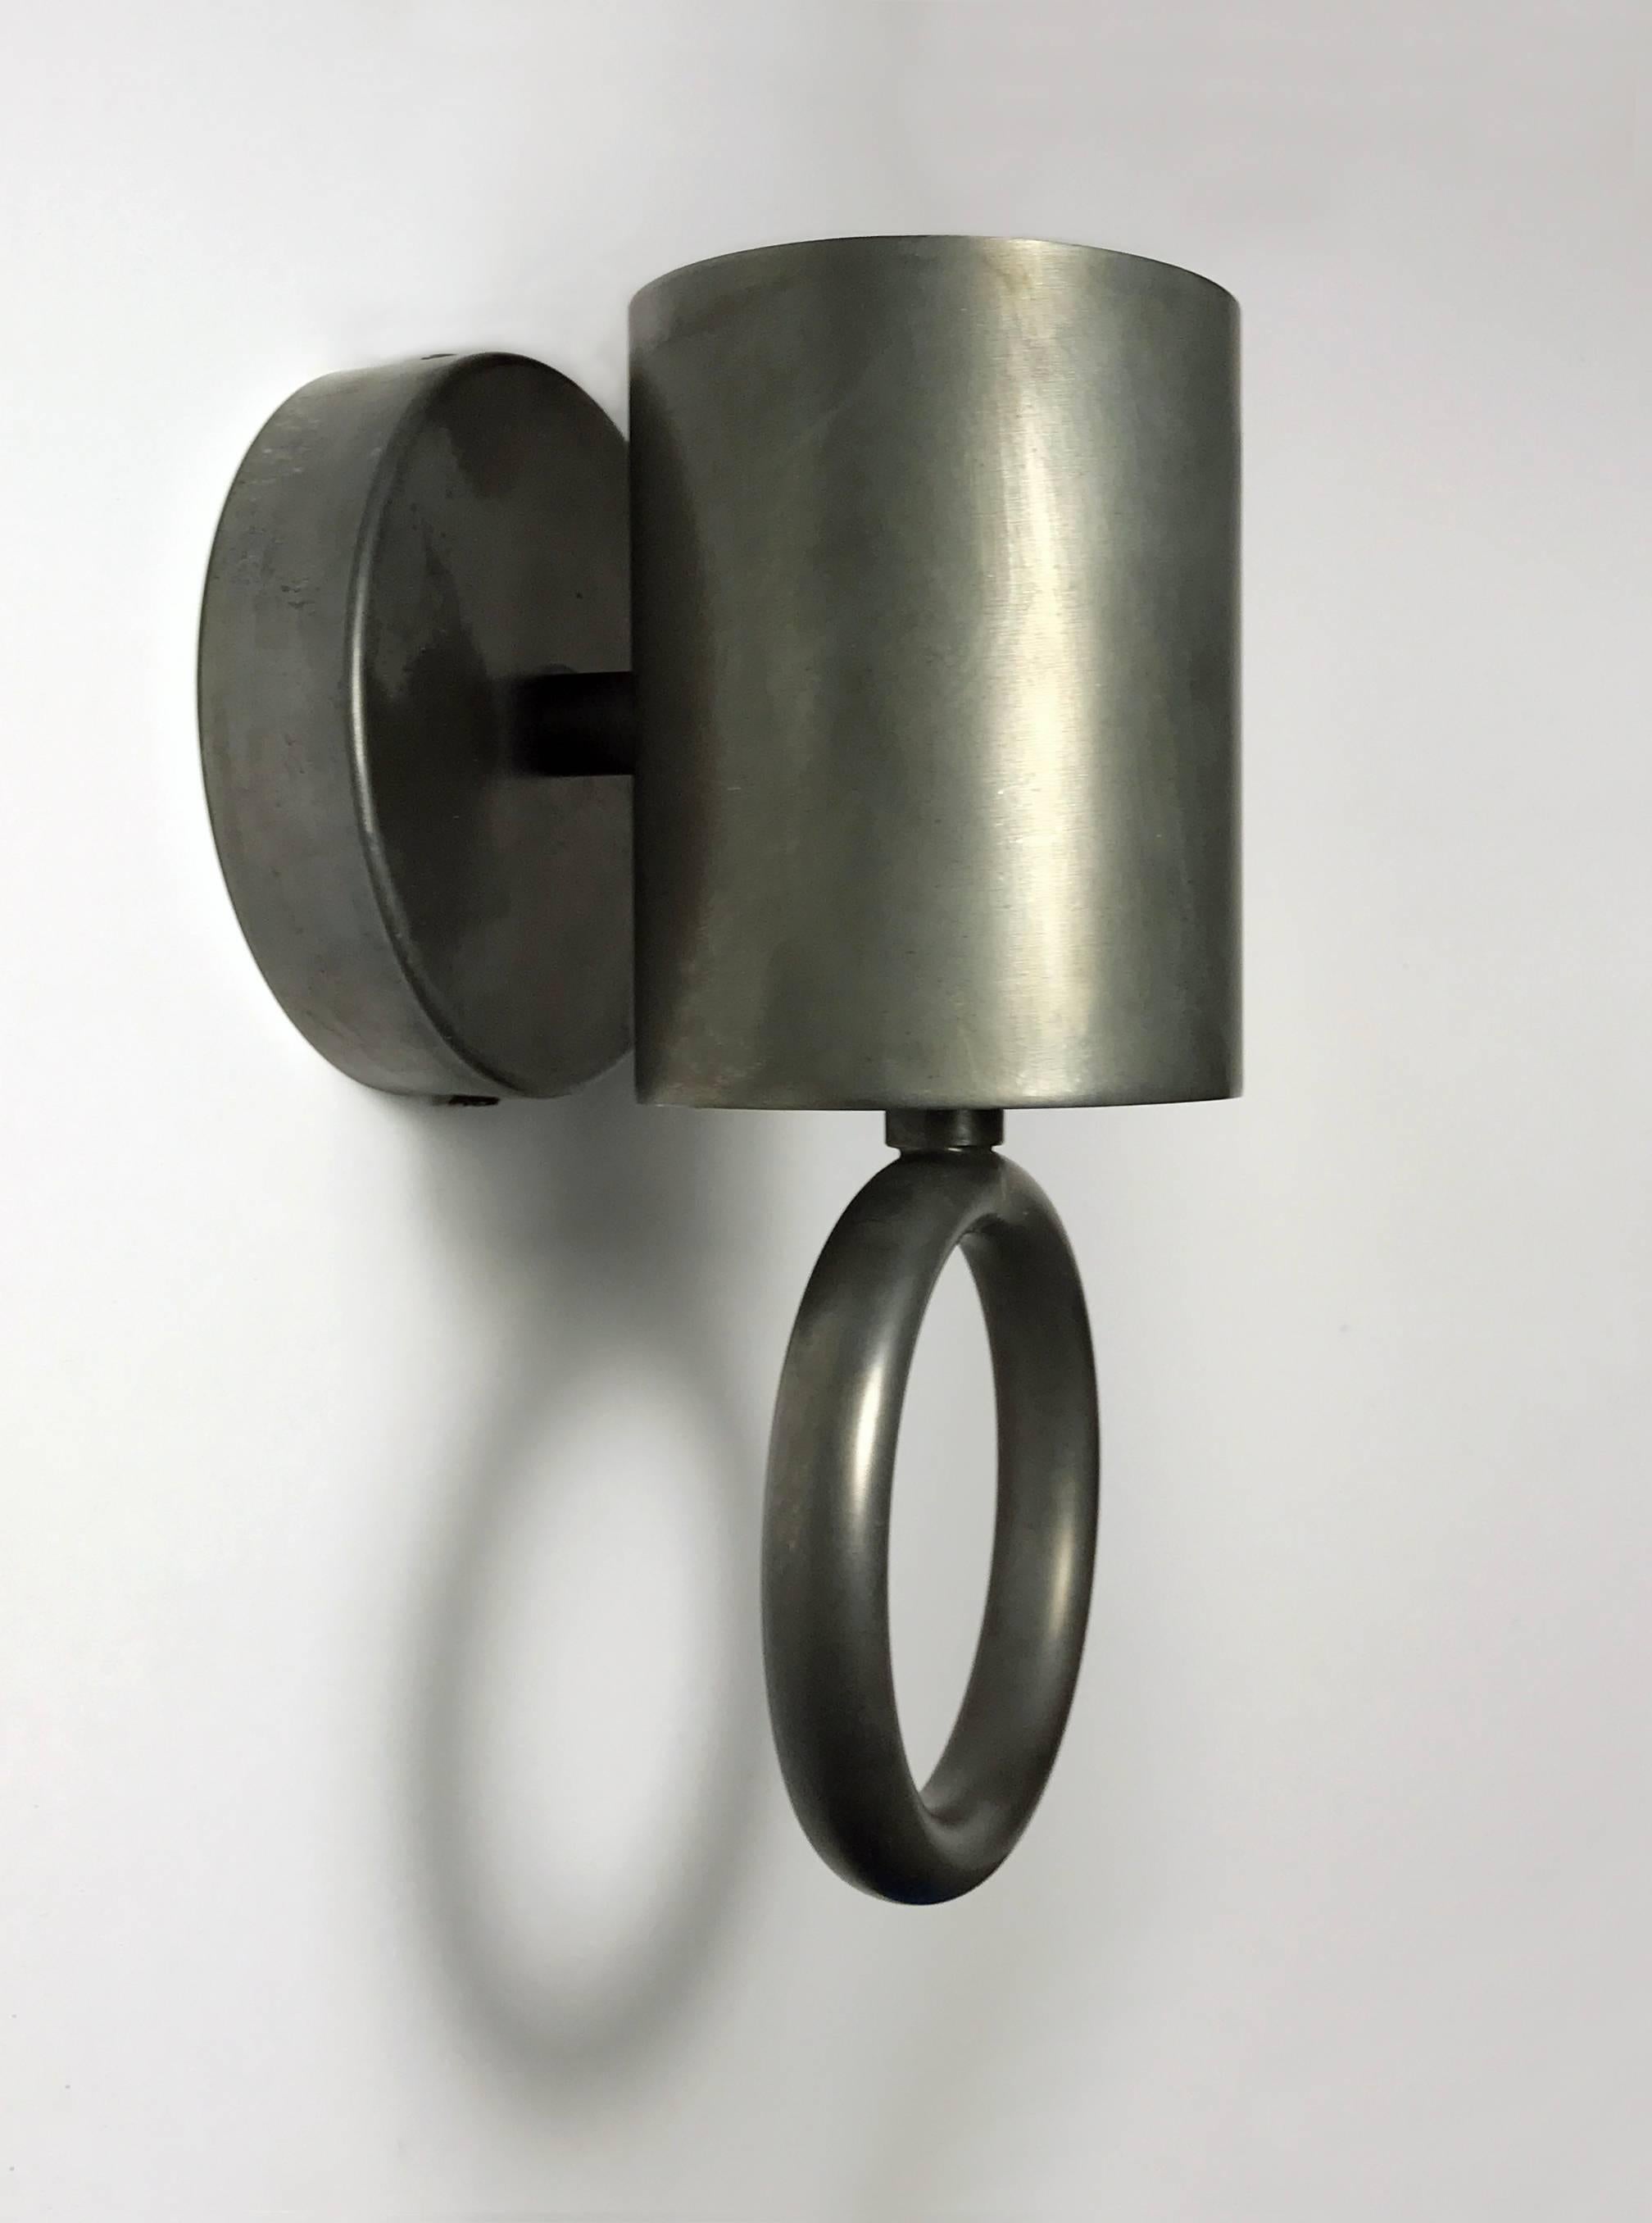 A compact wall light that works as uplighter or downlight. 
Shown here in a Rustic bronze finish. 
Created especially for Led GU10 bulbs.
    